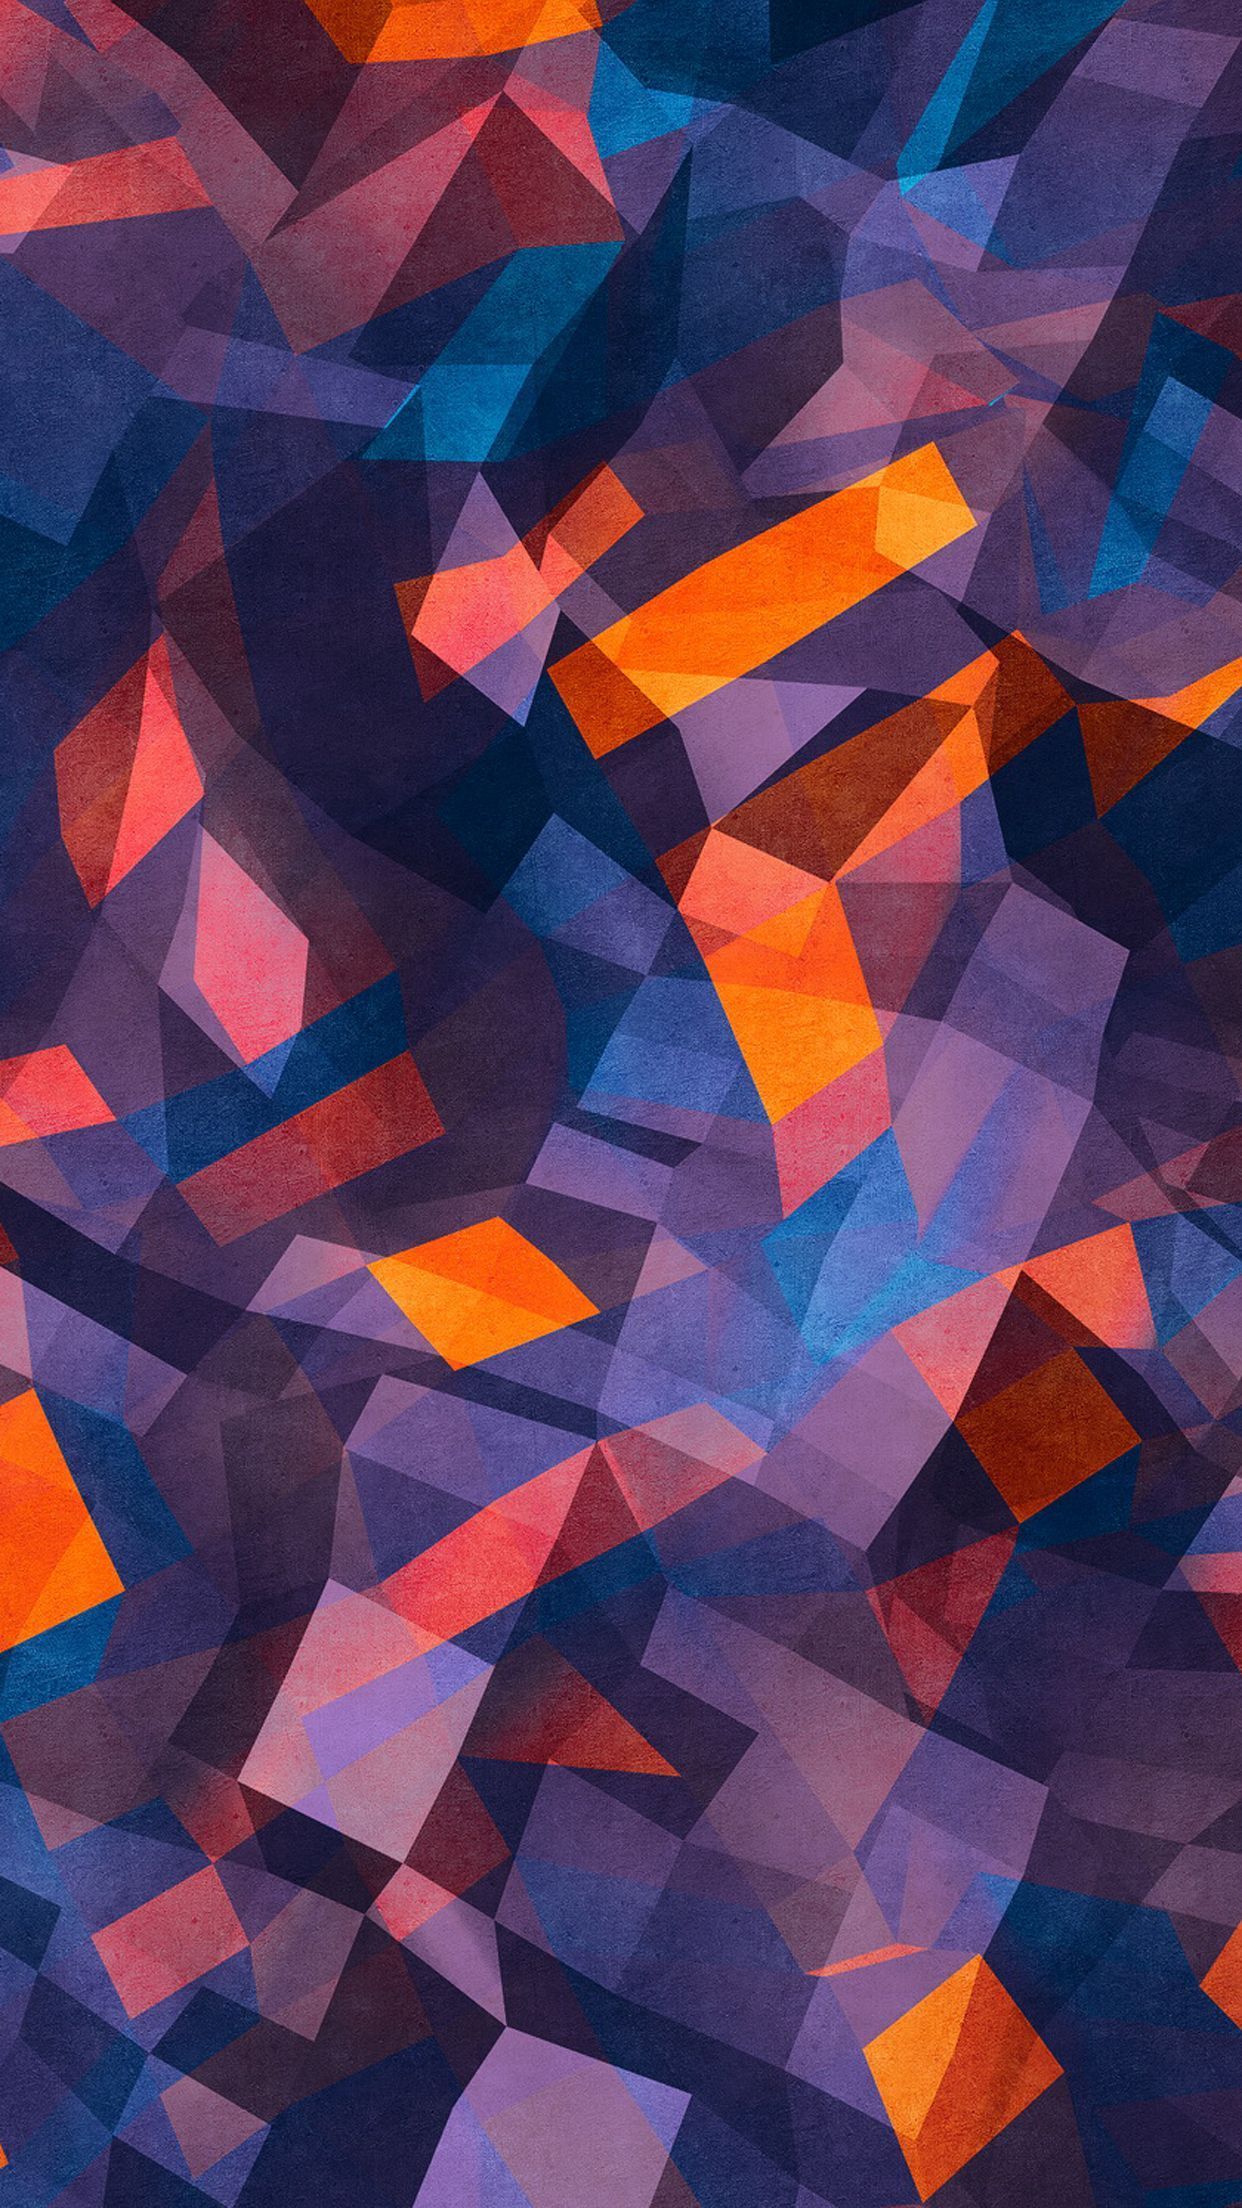 A beautiful collection of geometric wallpapers for iPhone